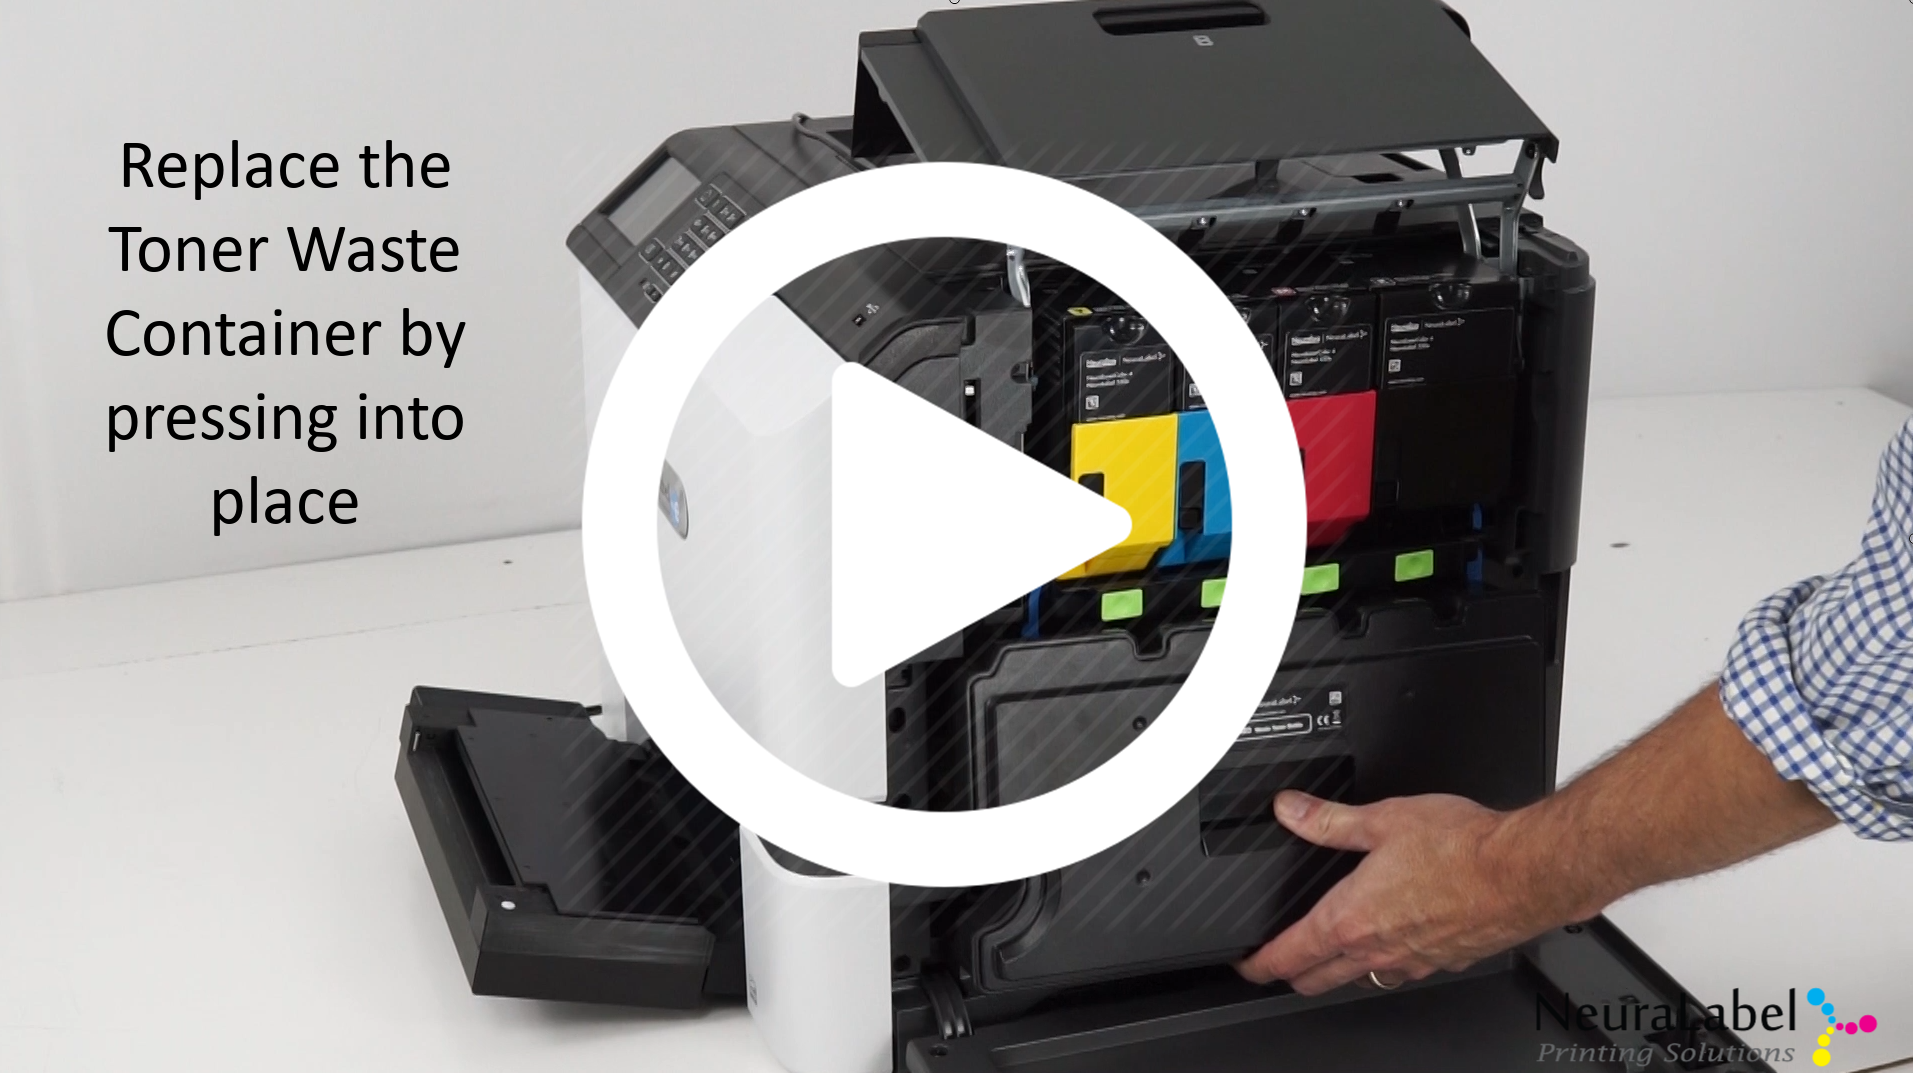 NeuraLabel 550e changing the toner waste container video